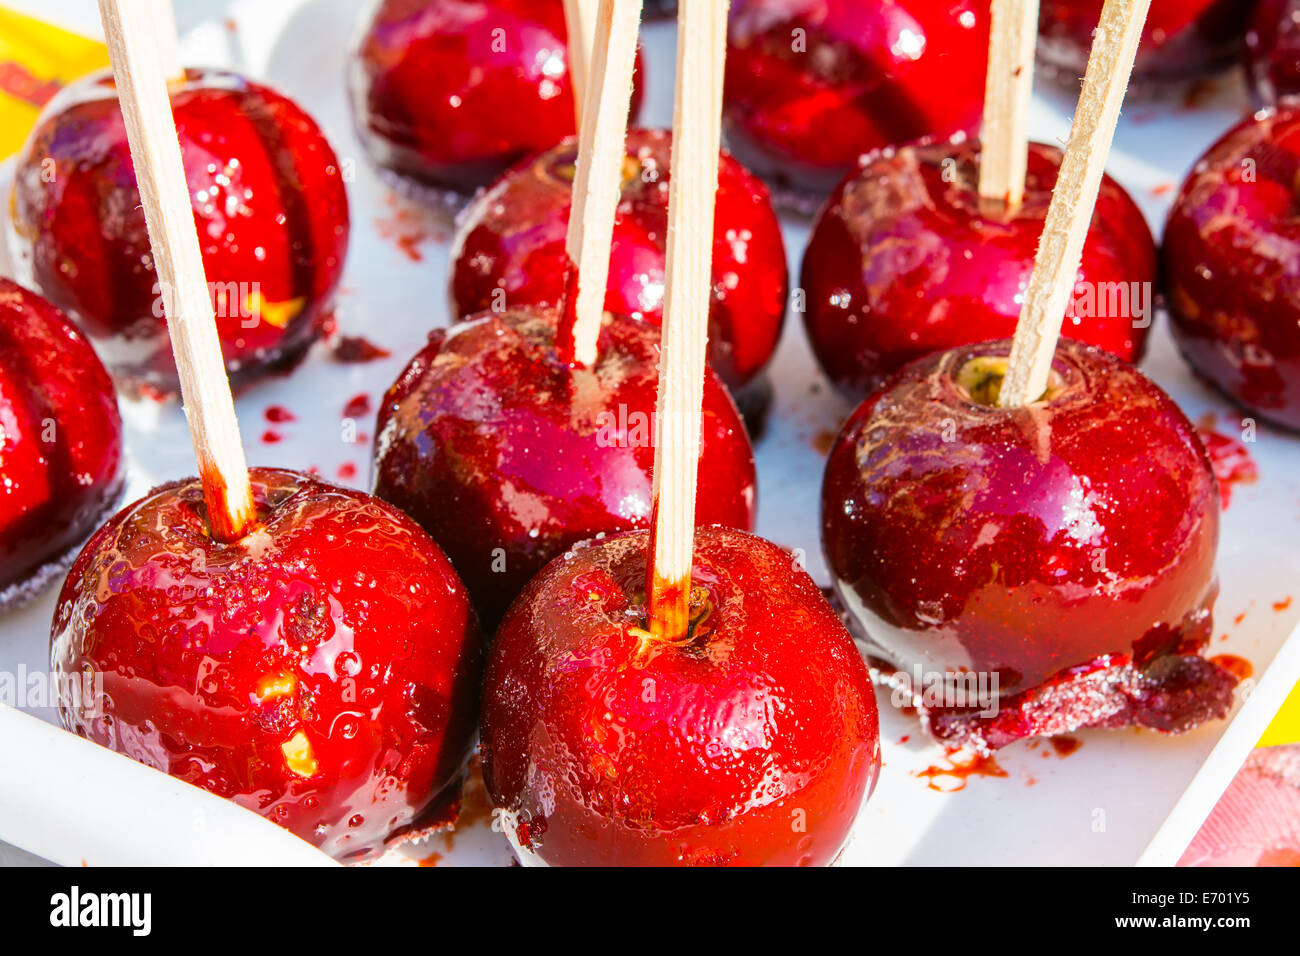 Caramelized Red Apples On White Wooden Sticks Stock Photo